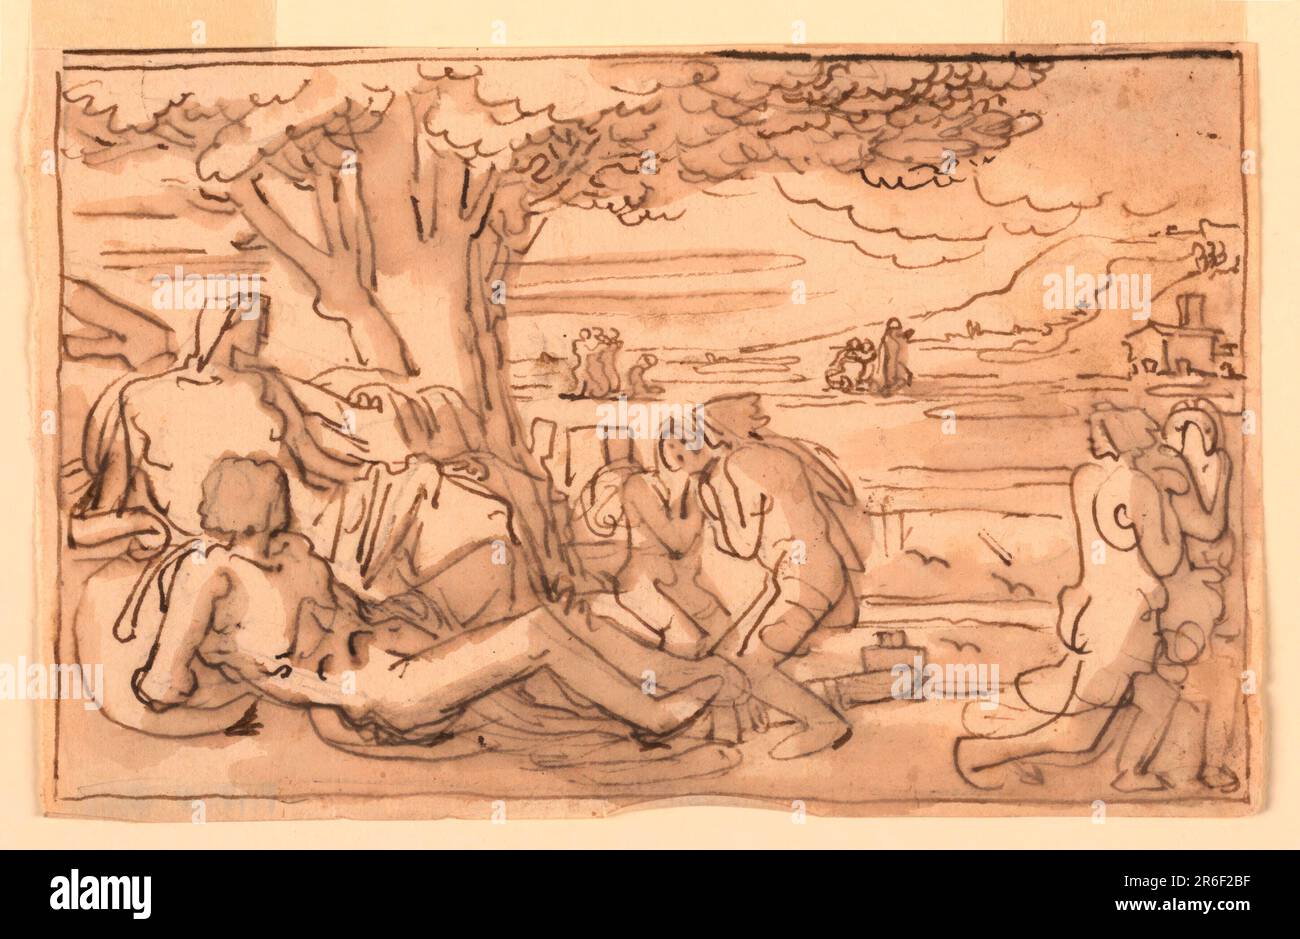 Sketch, Pastoral Scene with Figures in Landscape. Pen and ink, brush and sepia wash on paper. Date: 1820-1850. Museum: Cooper Hewitt, Smithsonian Design Museum. Stock Photo